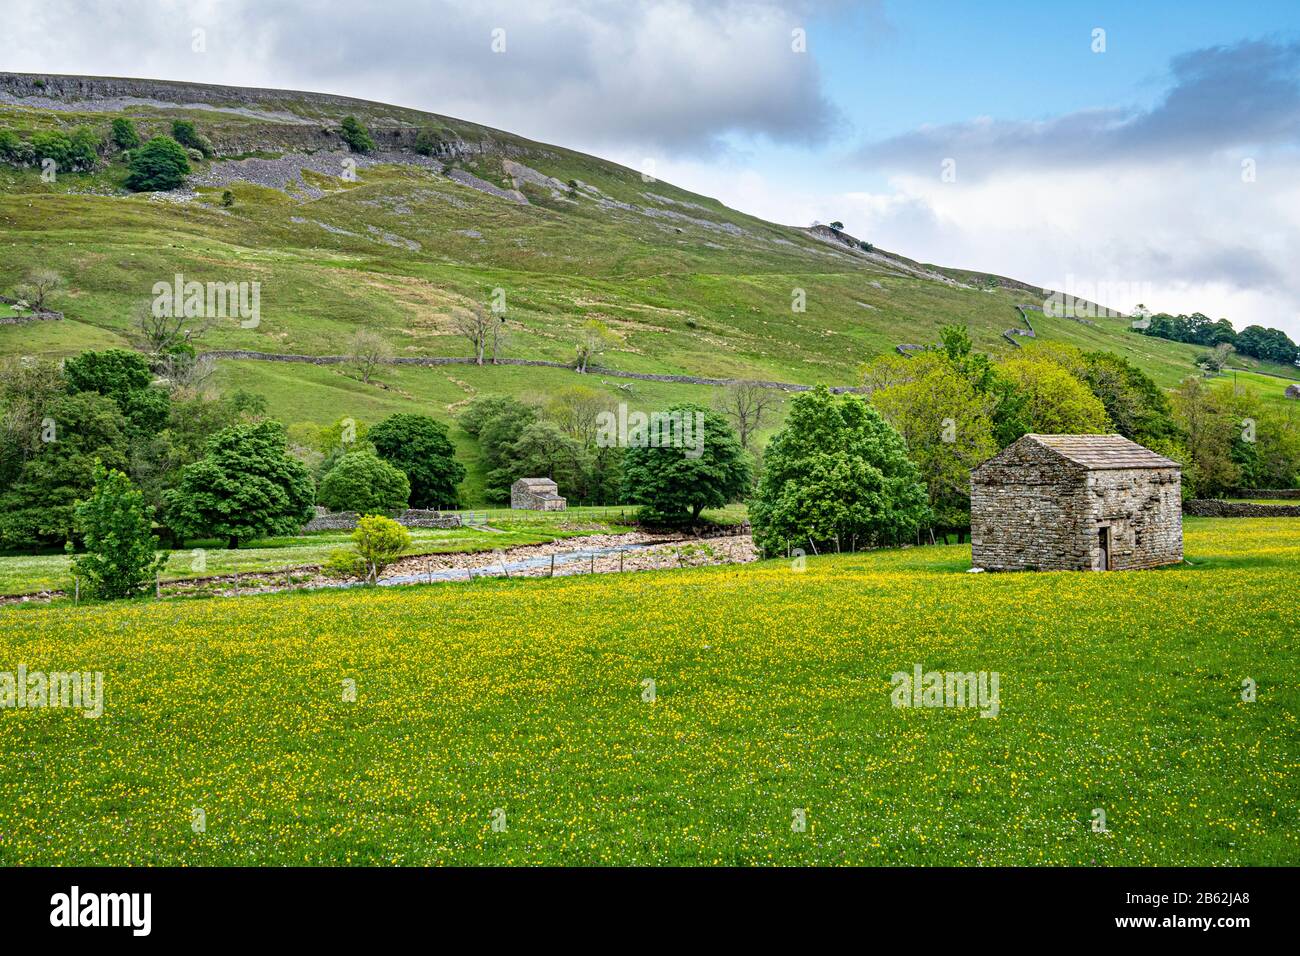 Traditional stone barn in hay meadow, upper Swaledale, Yorkshire Dales National Park, England, UK Stock Photo